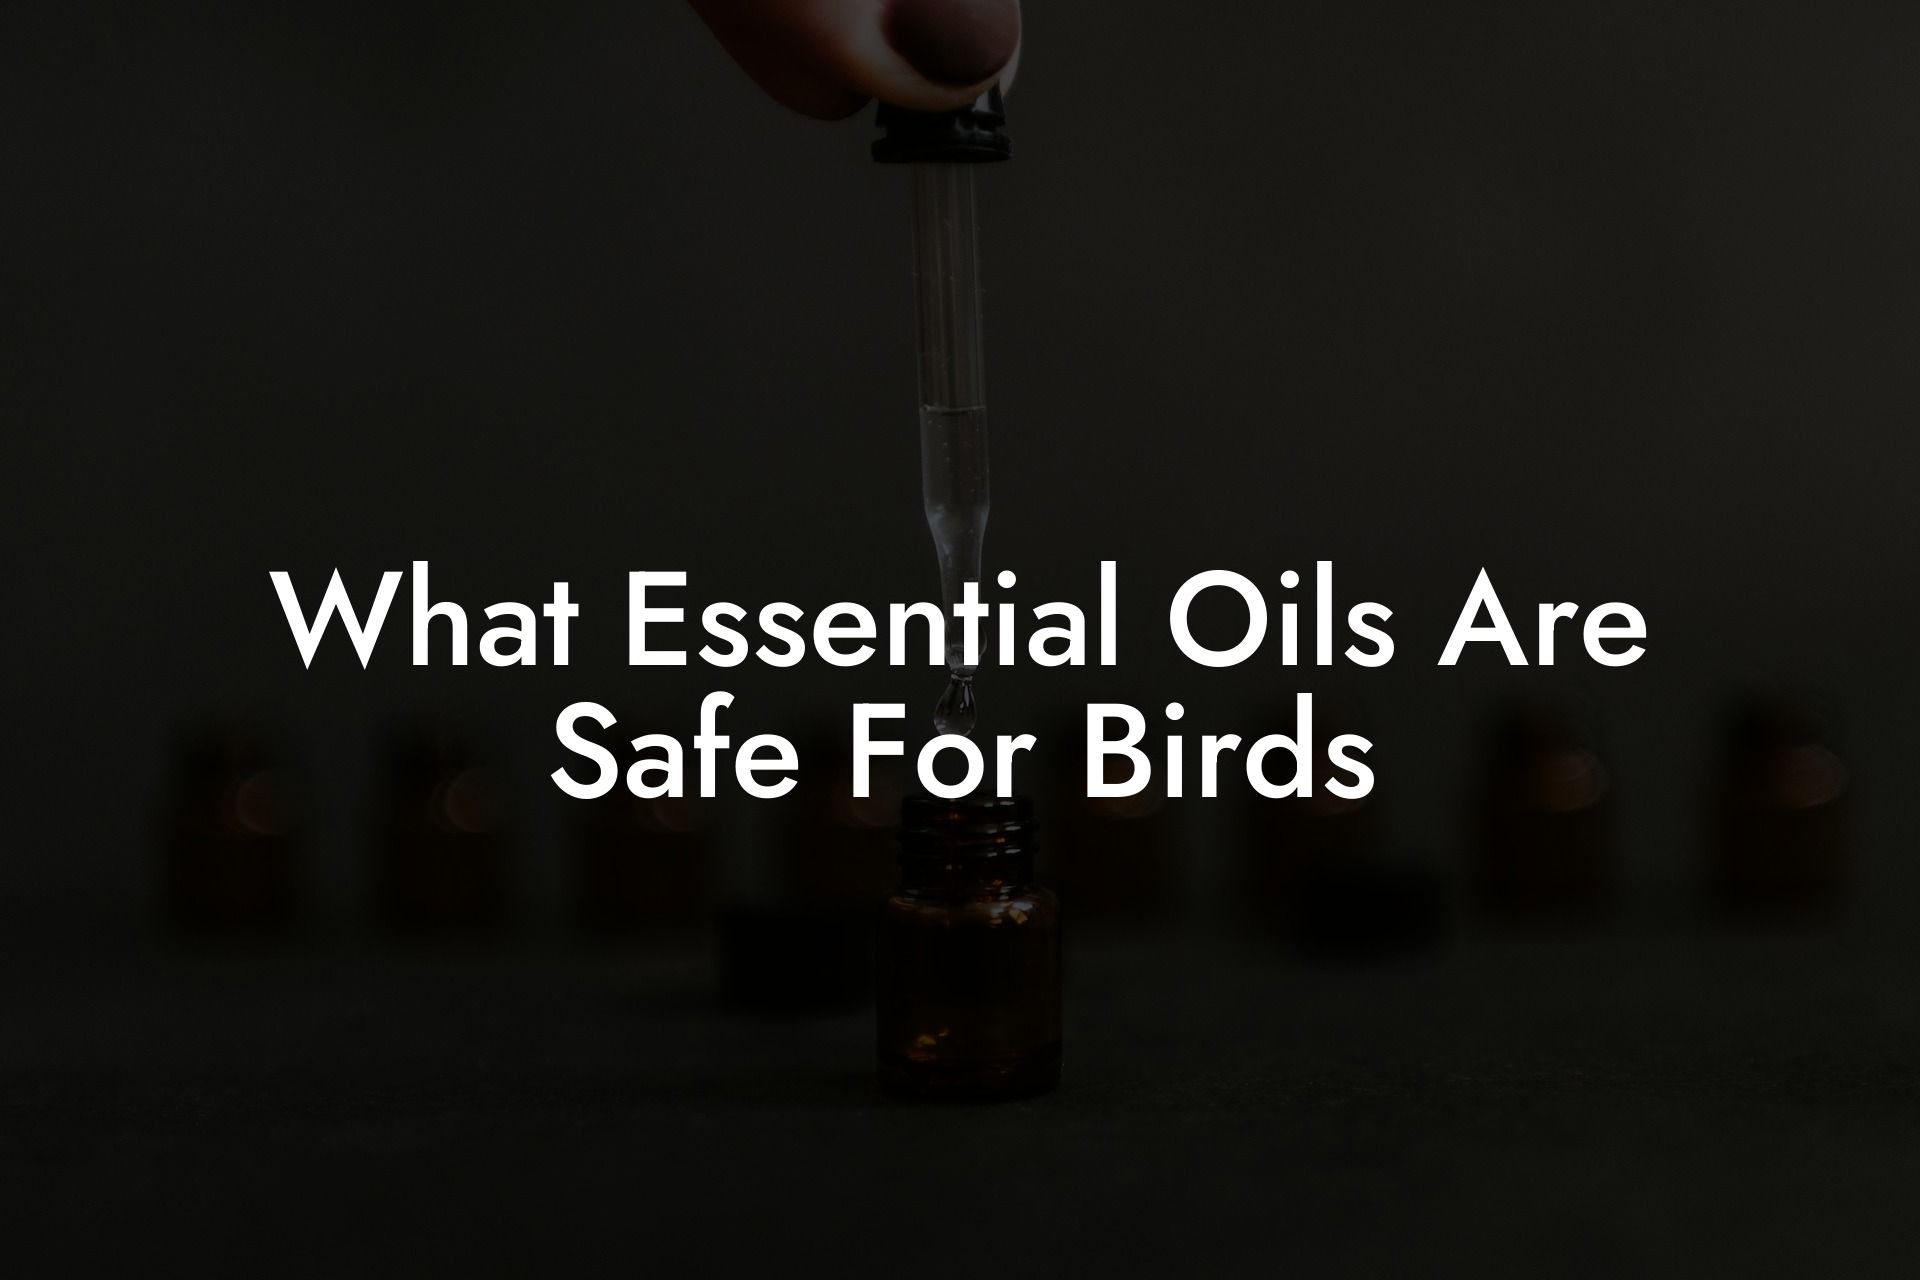 What Essential Oils Are Safe For Birds